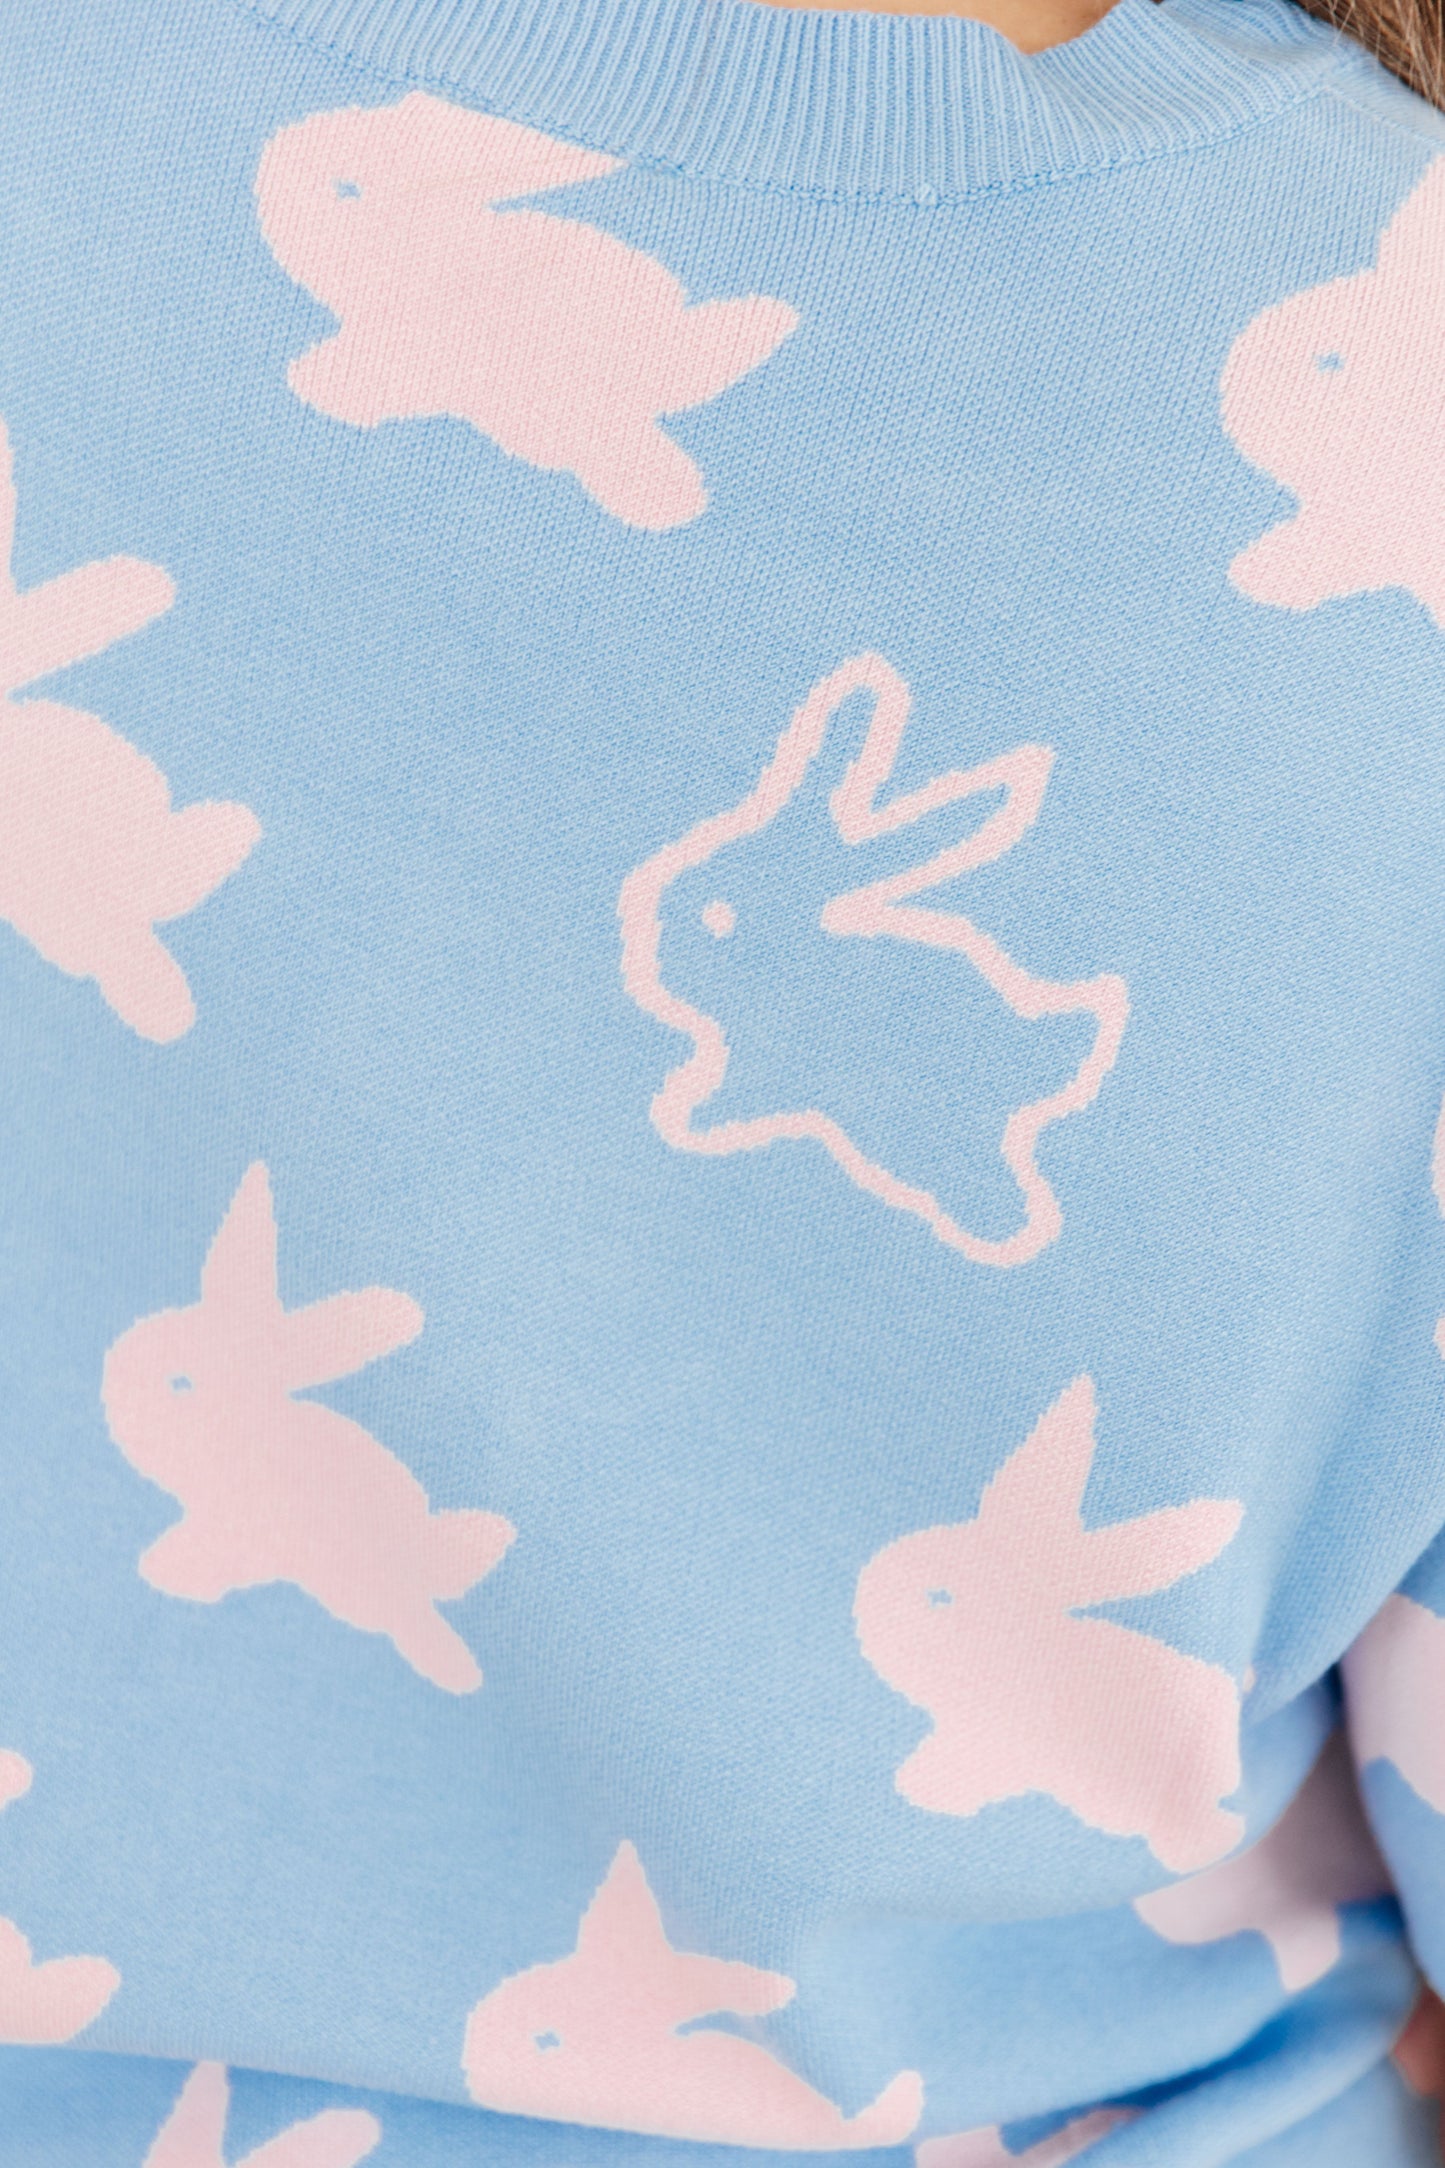 Cottontail Half Sleeve Bunny Sweater